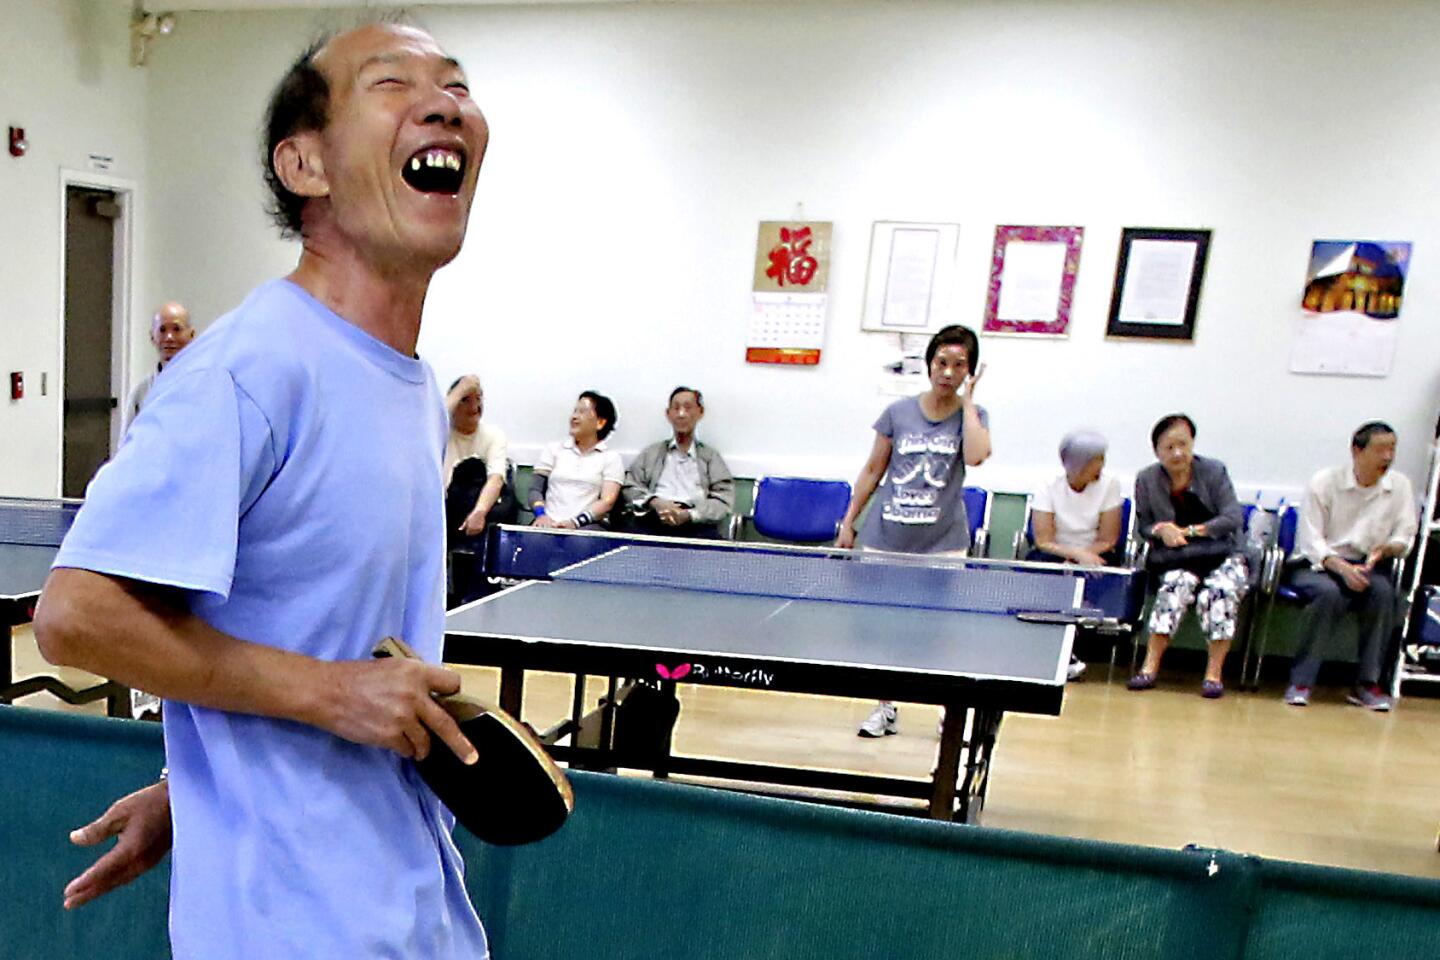 Ping pong table creates competition among seniors – The Falcon